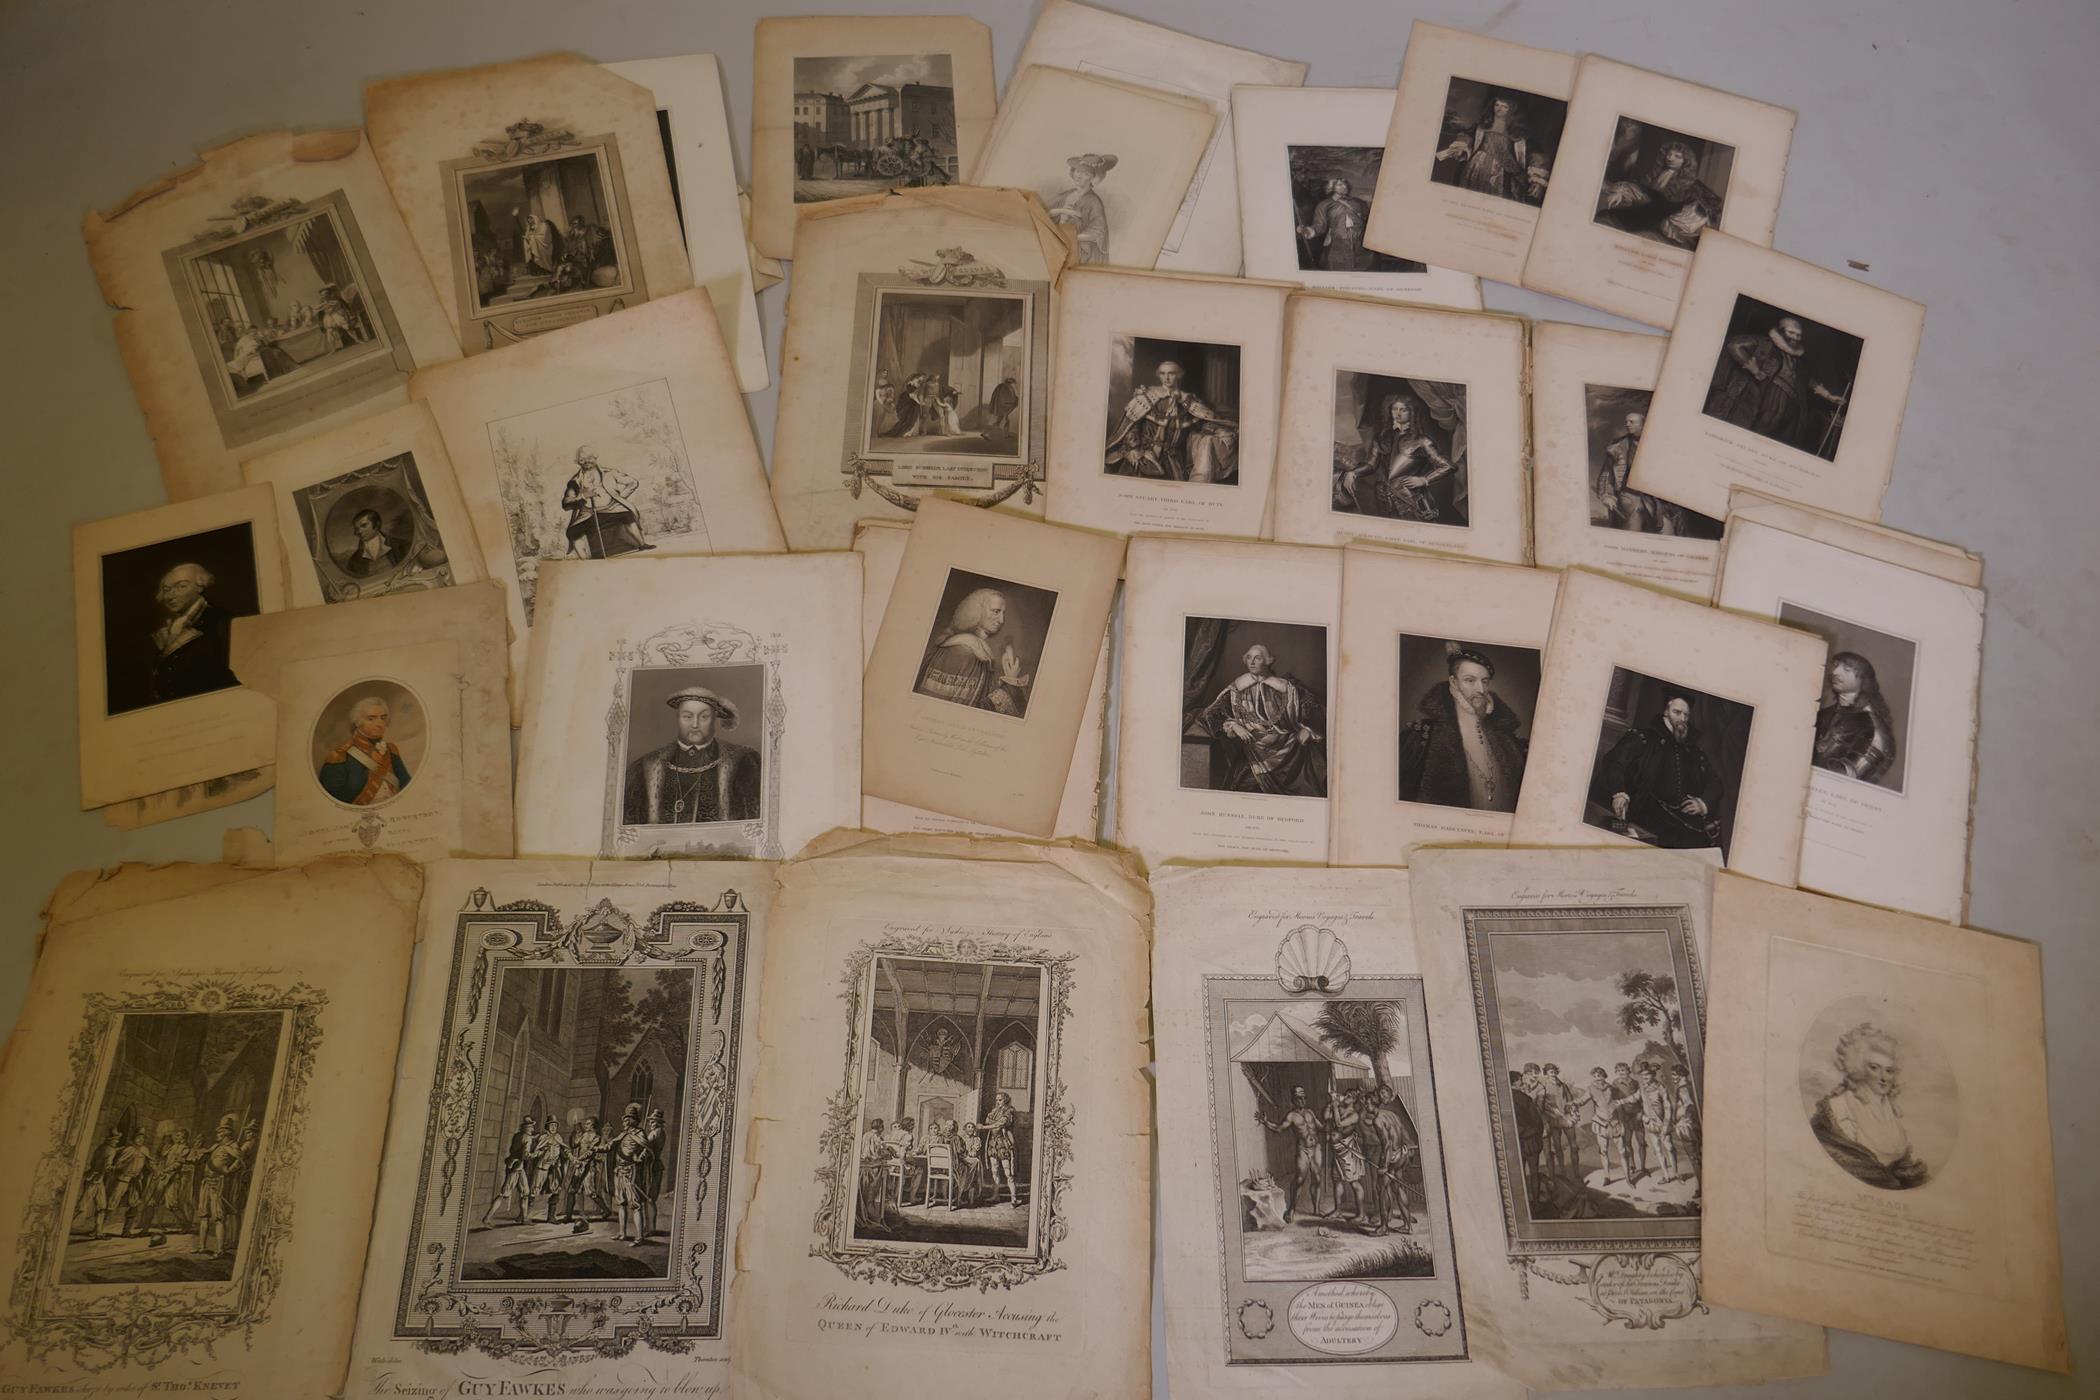 A quantity of early C19th engravings, published by Harding and Lepard, Pall Mall, earlier engravings